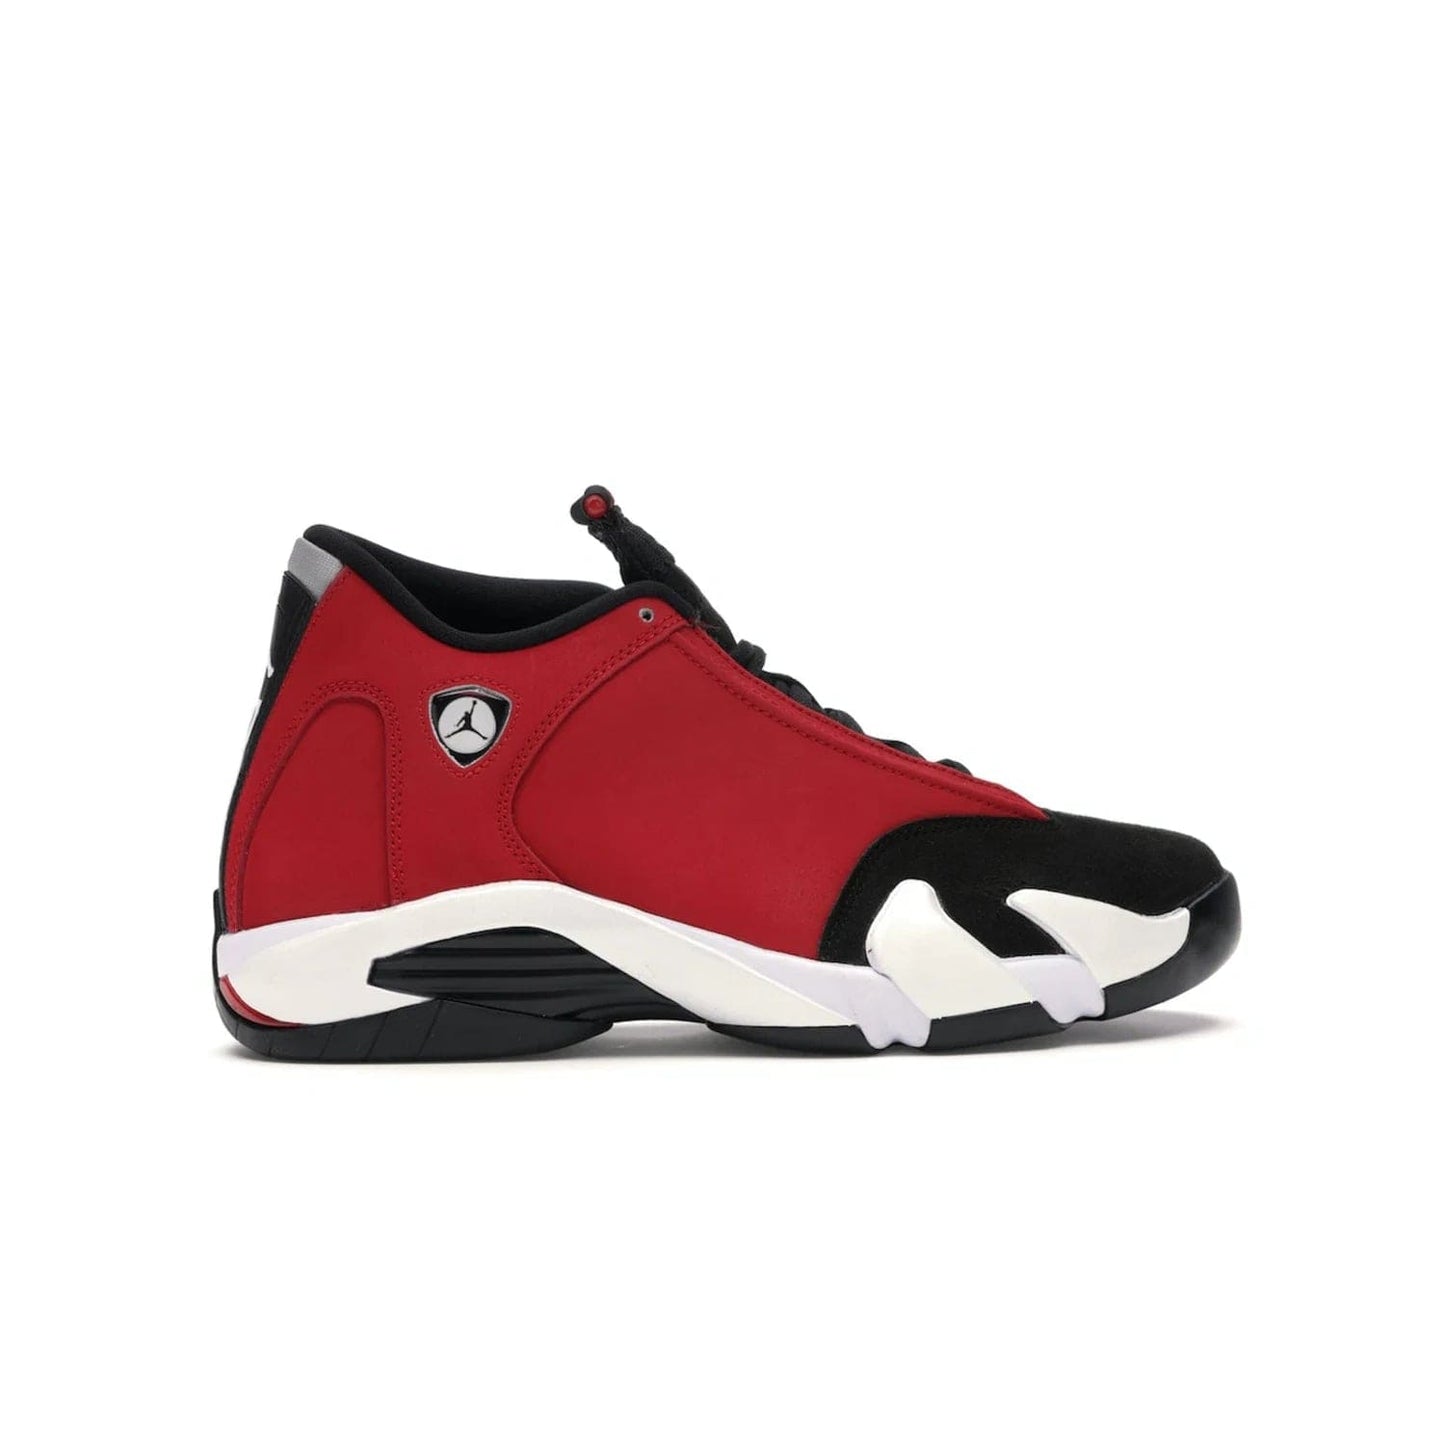 Jordan 14 Retro Gym Red Toro - Image 36 - Only at www.BallersClubKickz.com - Feel the Chicago Bulls energy with the Jordan 14 Retro Gym Red Toro! Black, red, and white design unites performance and fashion. Get your hands on this limited edition Jordan and show off your style today.